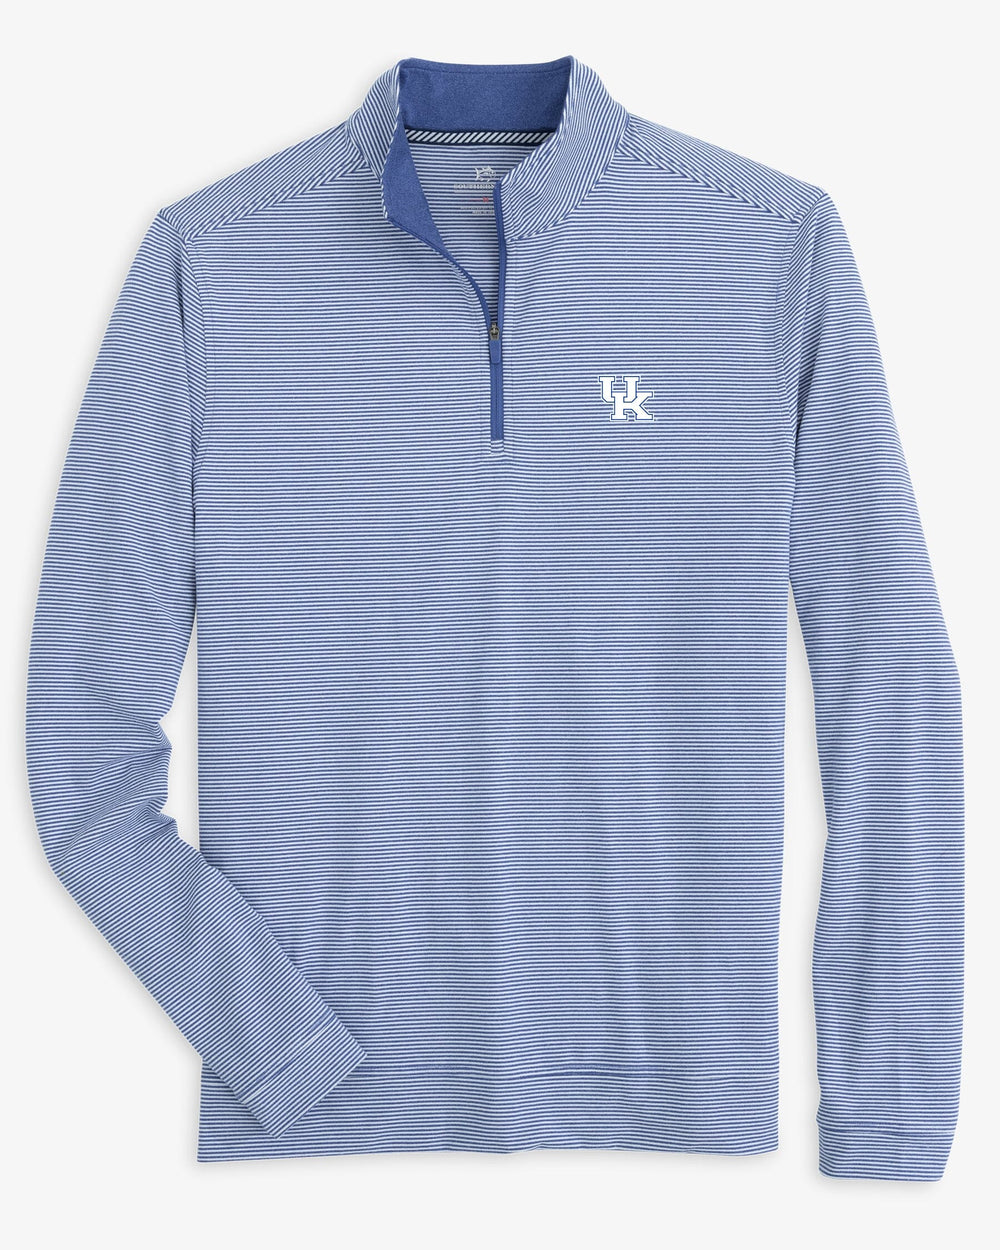 The front view of the Kentucky Wildcats Cruiser Micro-Stripe Heather Quarter Zip by Southern Tide - Heather University Blue